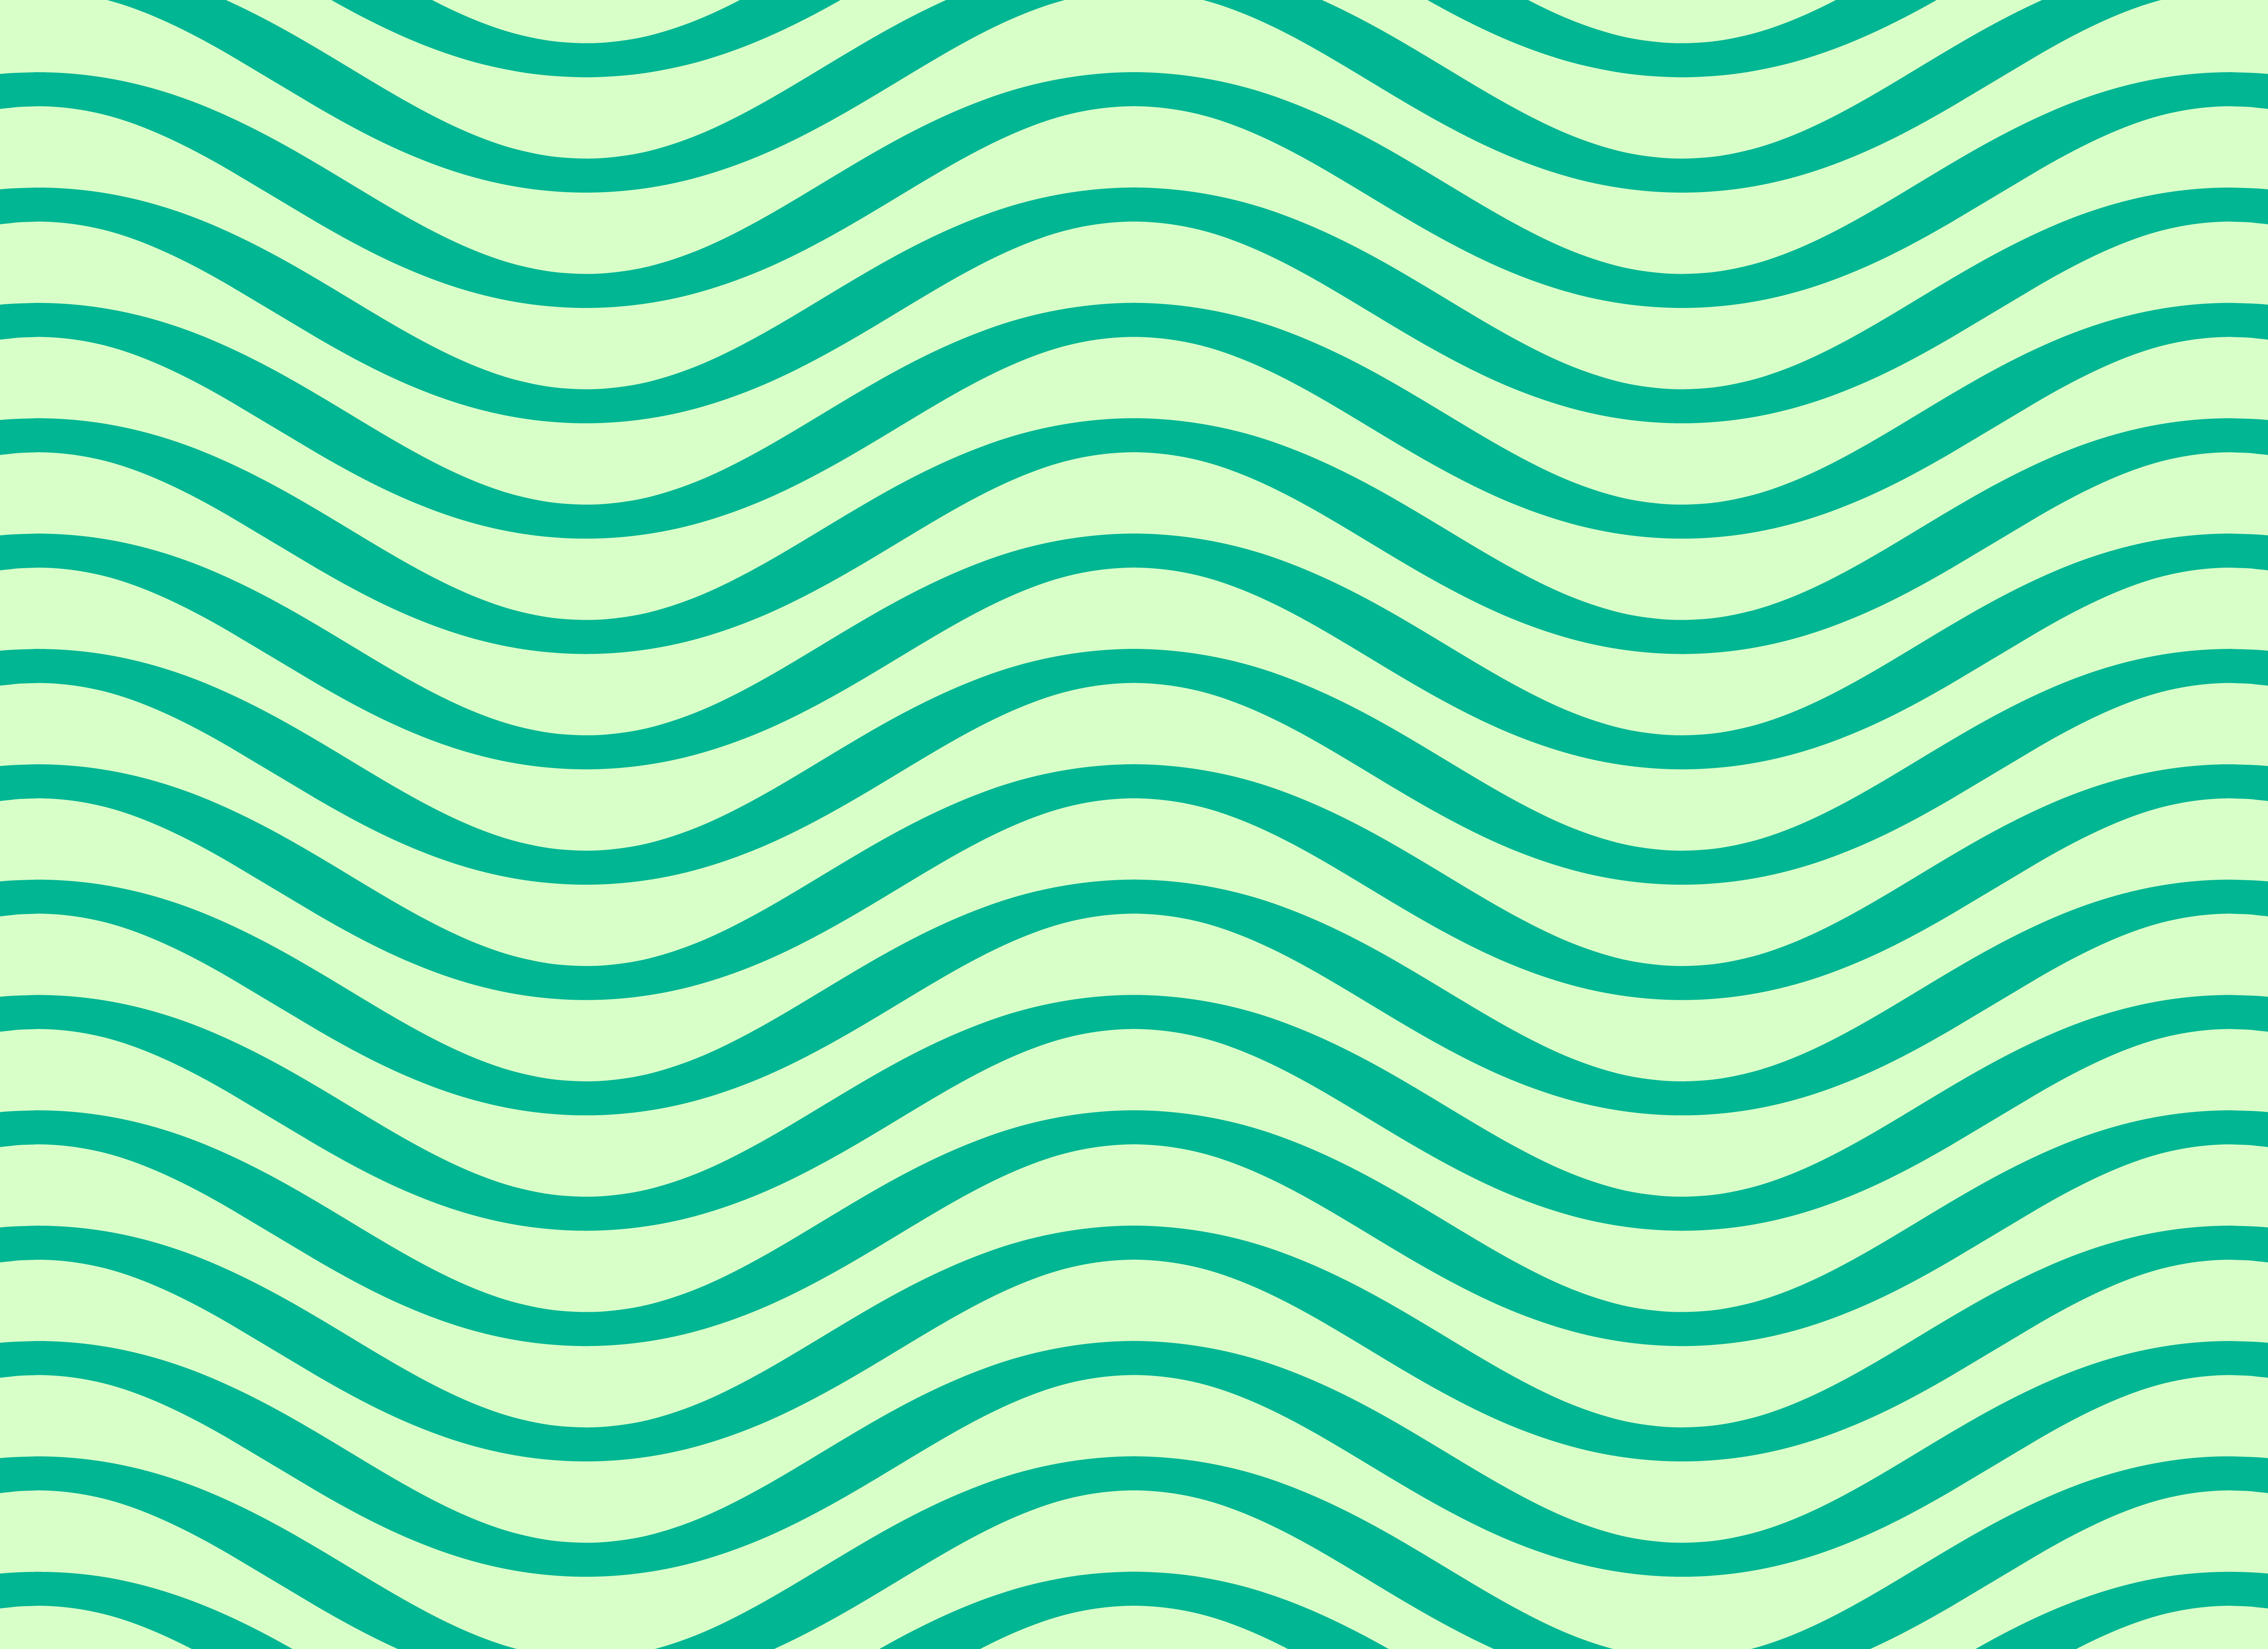 abstract wavy lines pattern design - Download Free Vector Art, Stock ...
 Line Pattern Design